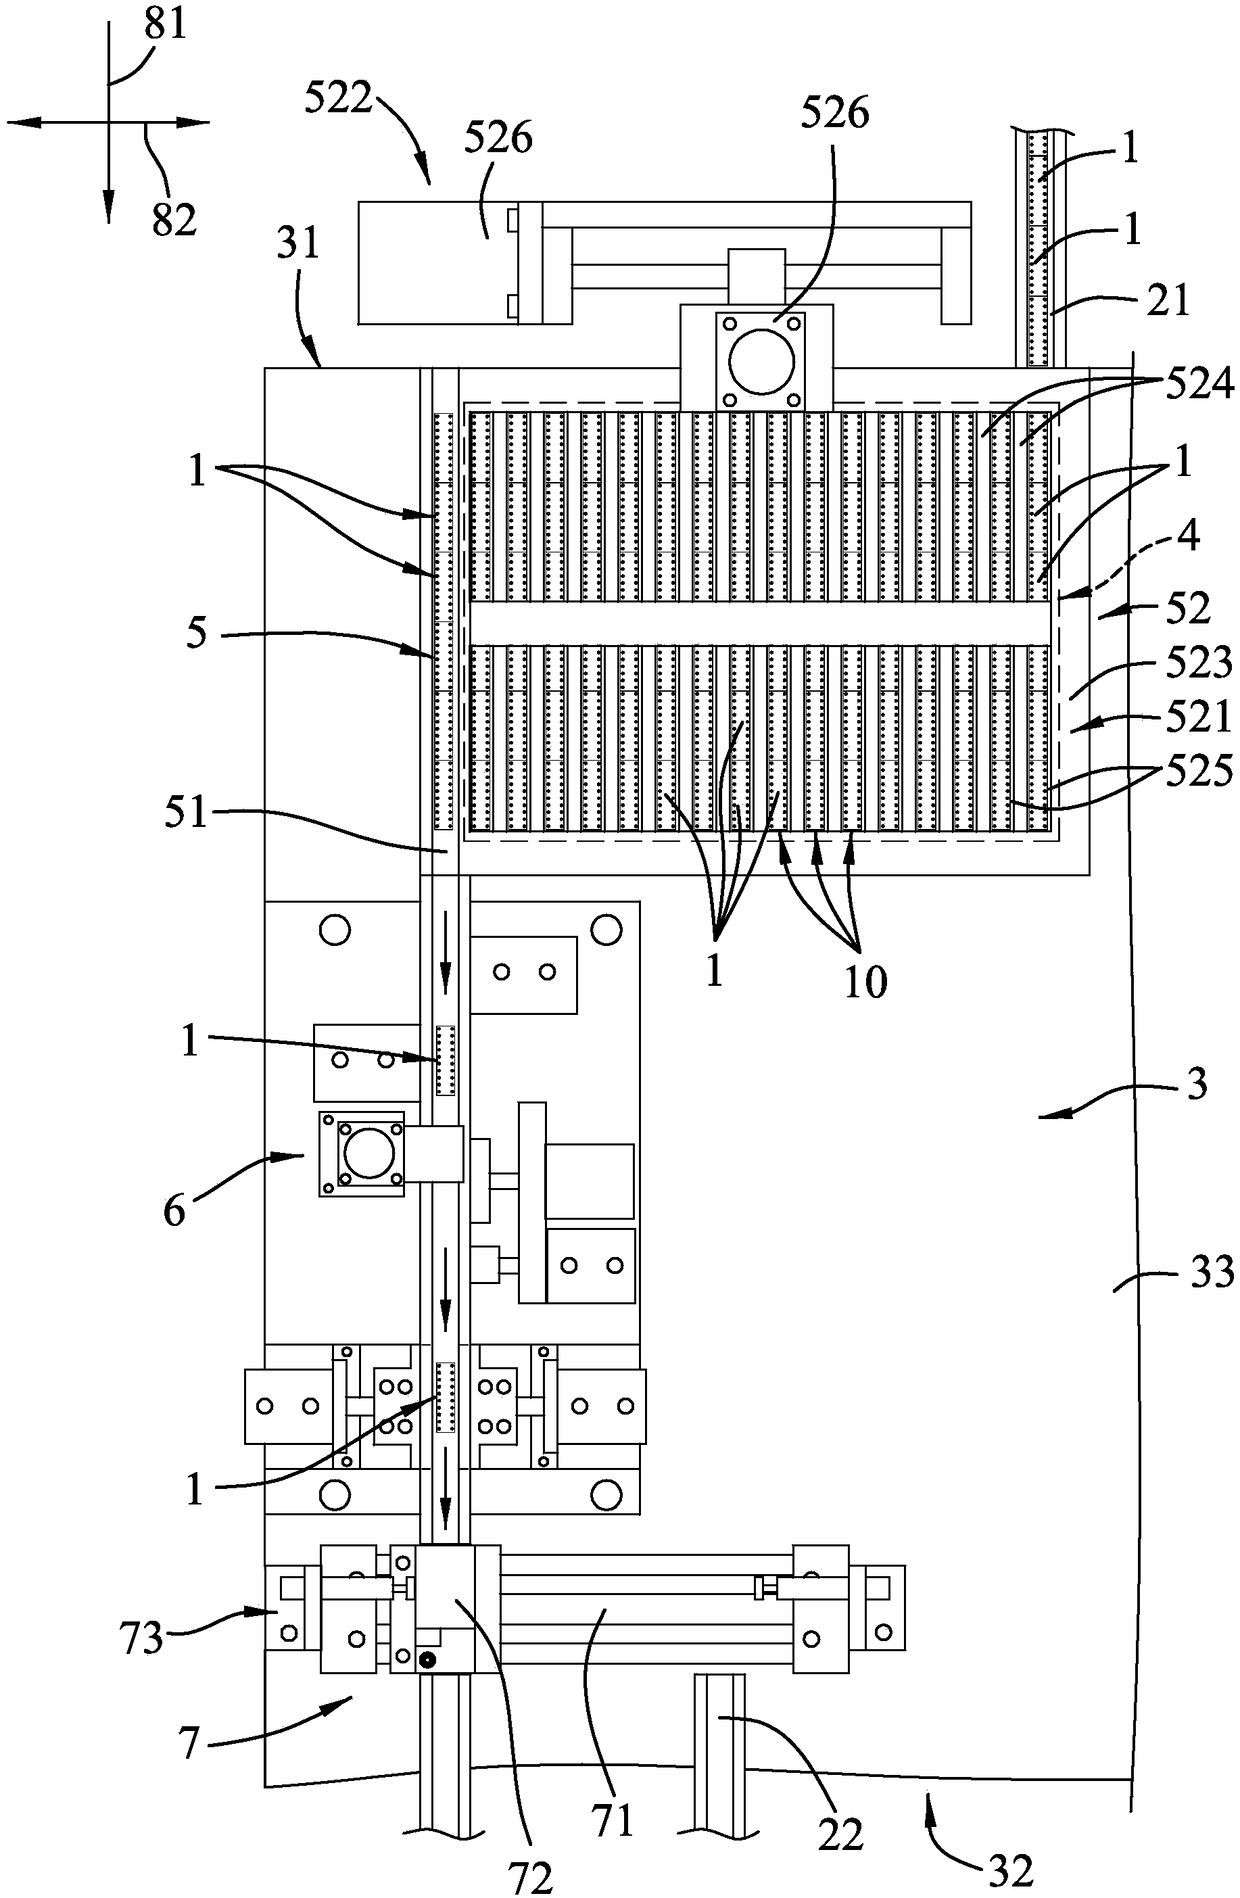 Electronic component testing device